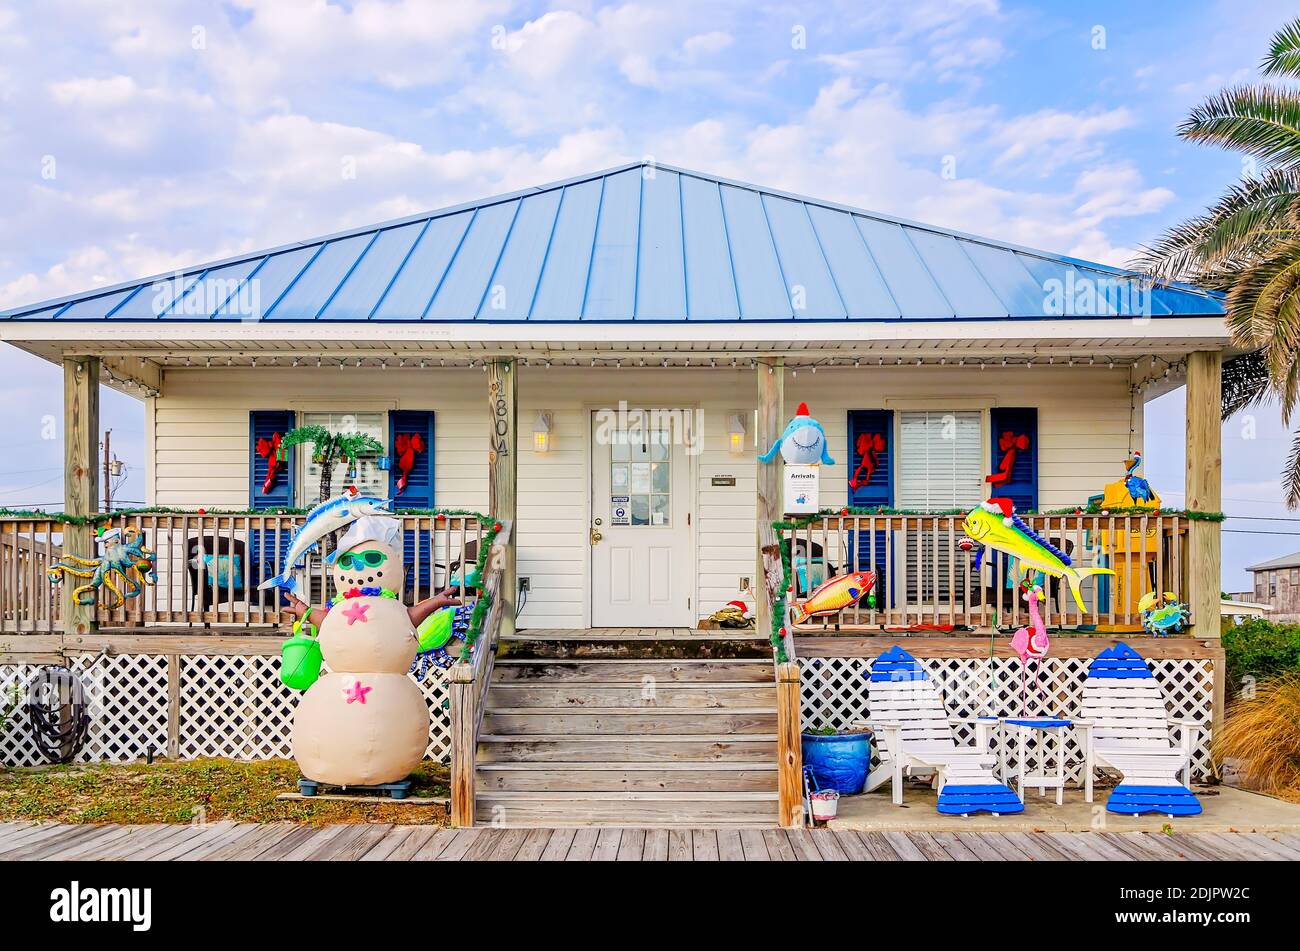 The Boardwalk Realty is decorated for Christmas, Dec. 13, 2020, in Dauphin Island, Alabama. Boardwalk Realty specializes in beach vacation rentals. Stock Photo